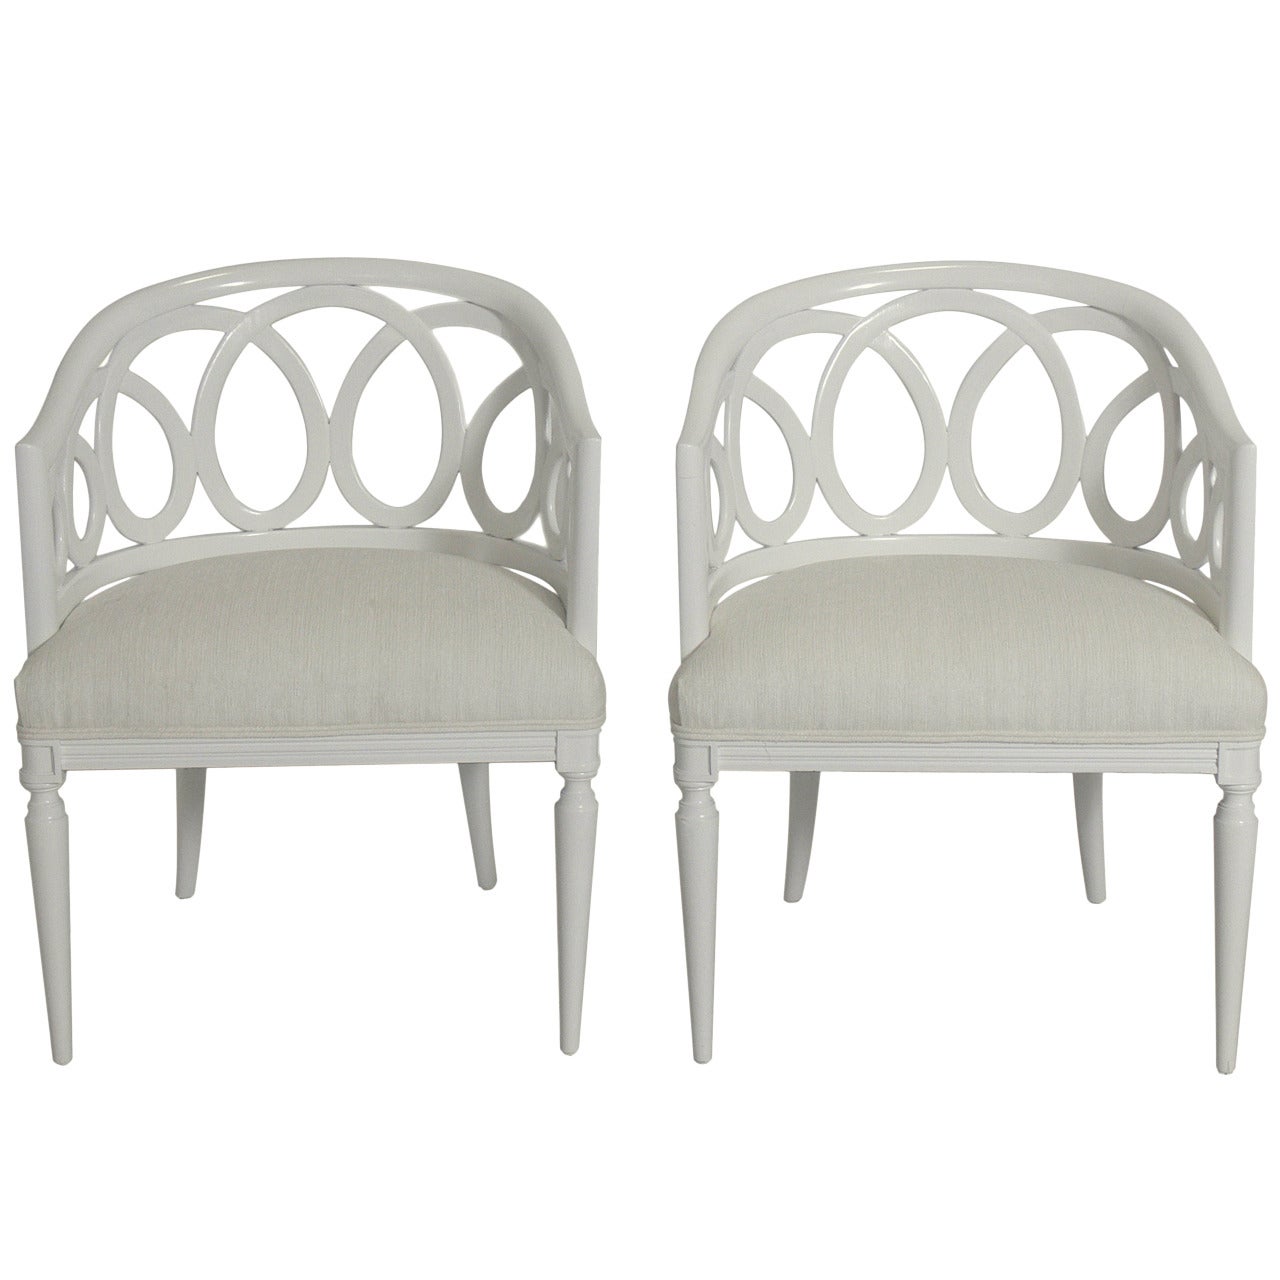 Pair of White Lacquer Loop Back Chairs